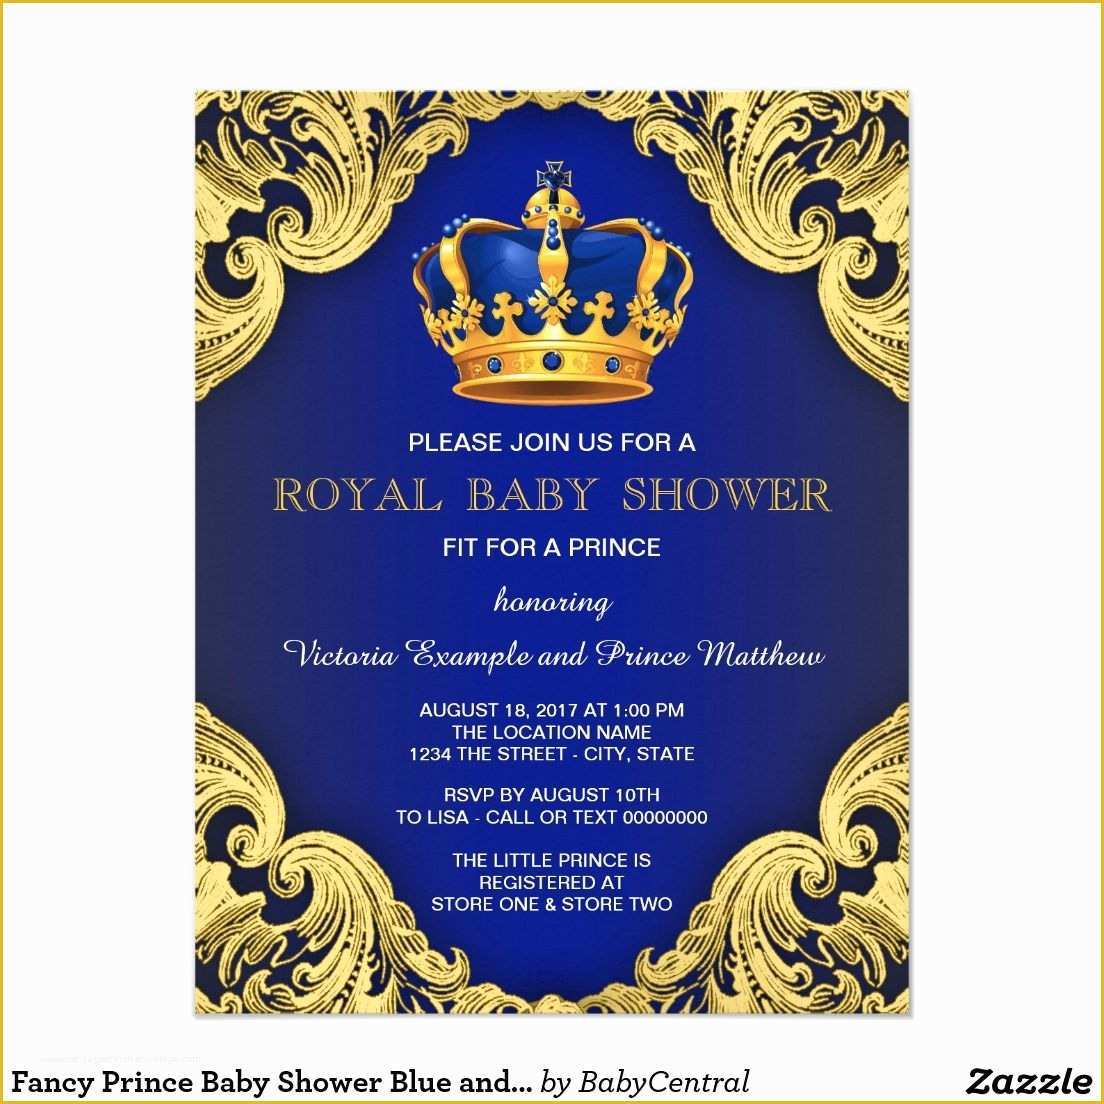 Free Royal Prince Baby Shower Invitation Template Of Fancy Prince Baby Shower Blue and Gold Invitation